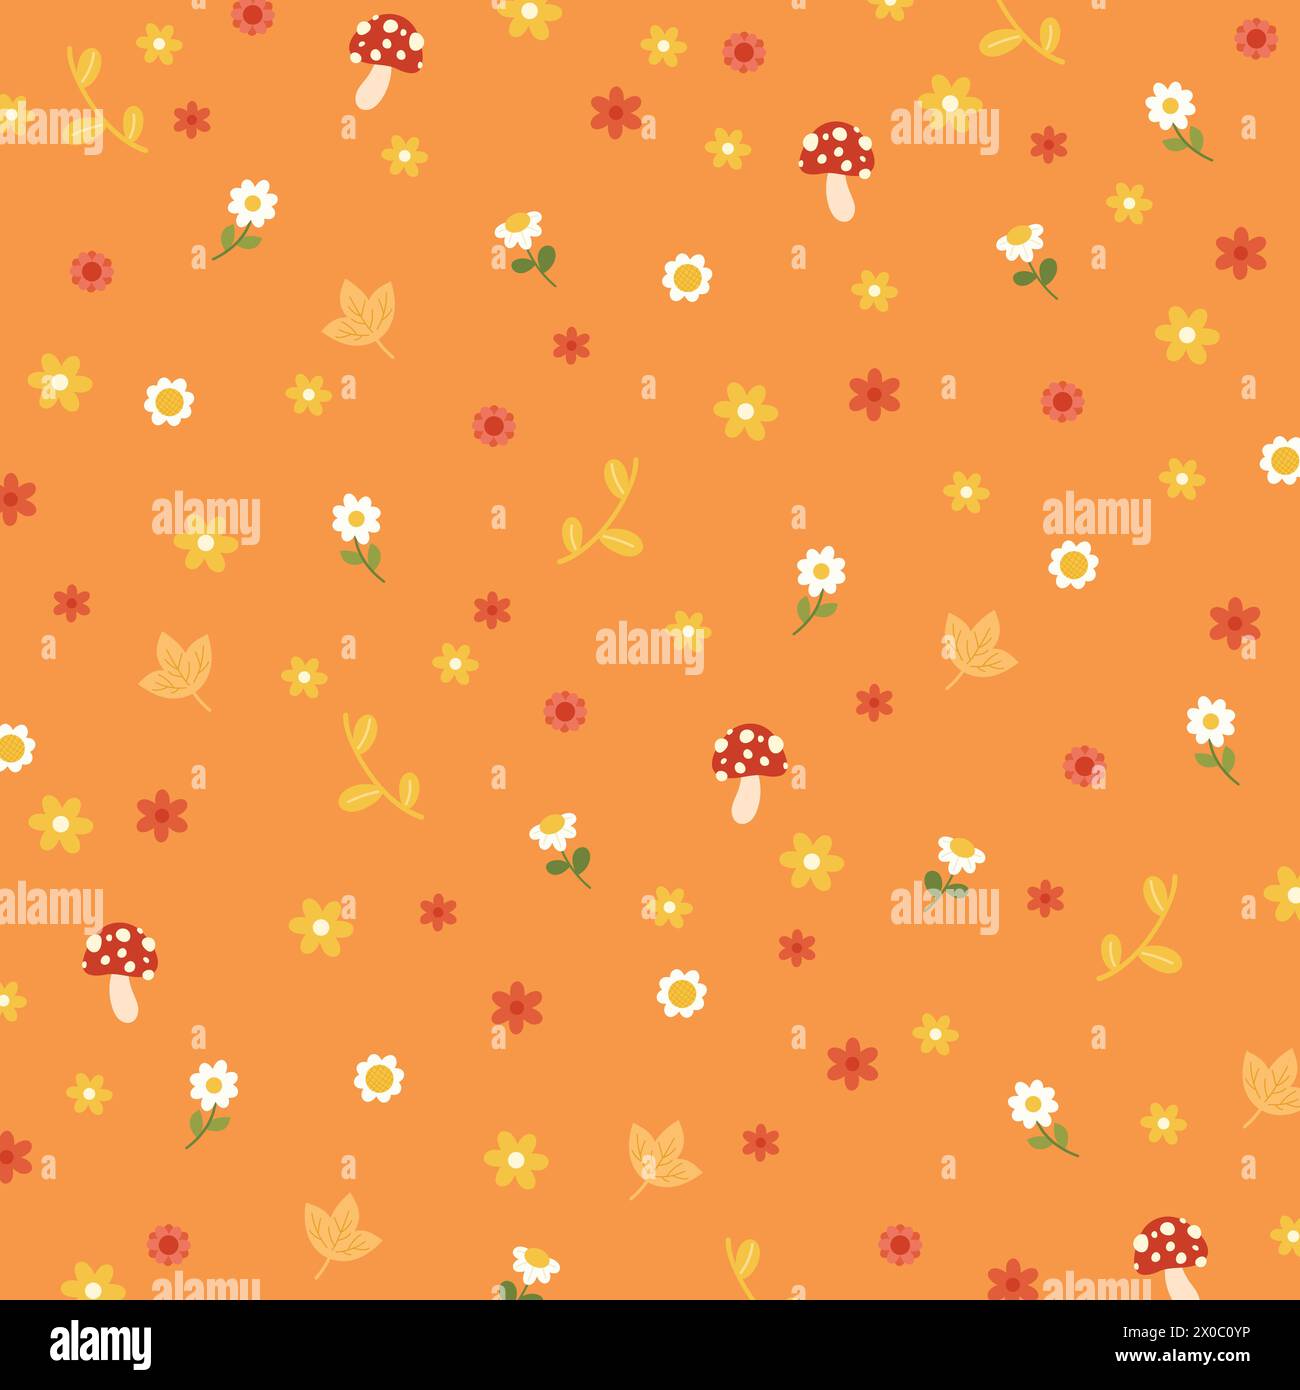 Autumn illustrations of mushroom, flowers and leaves on an orange background for wallpaper, fabric print, floral pattern, textile, kid clothes Stock Vector